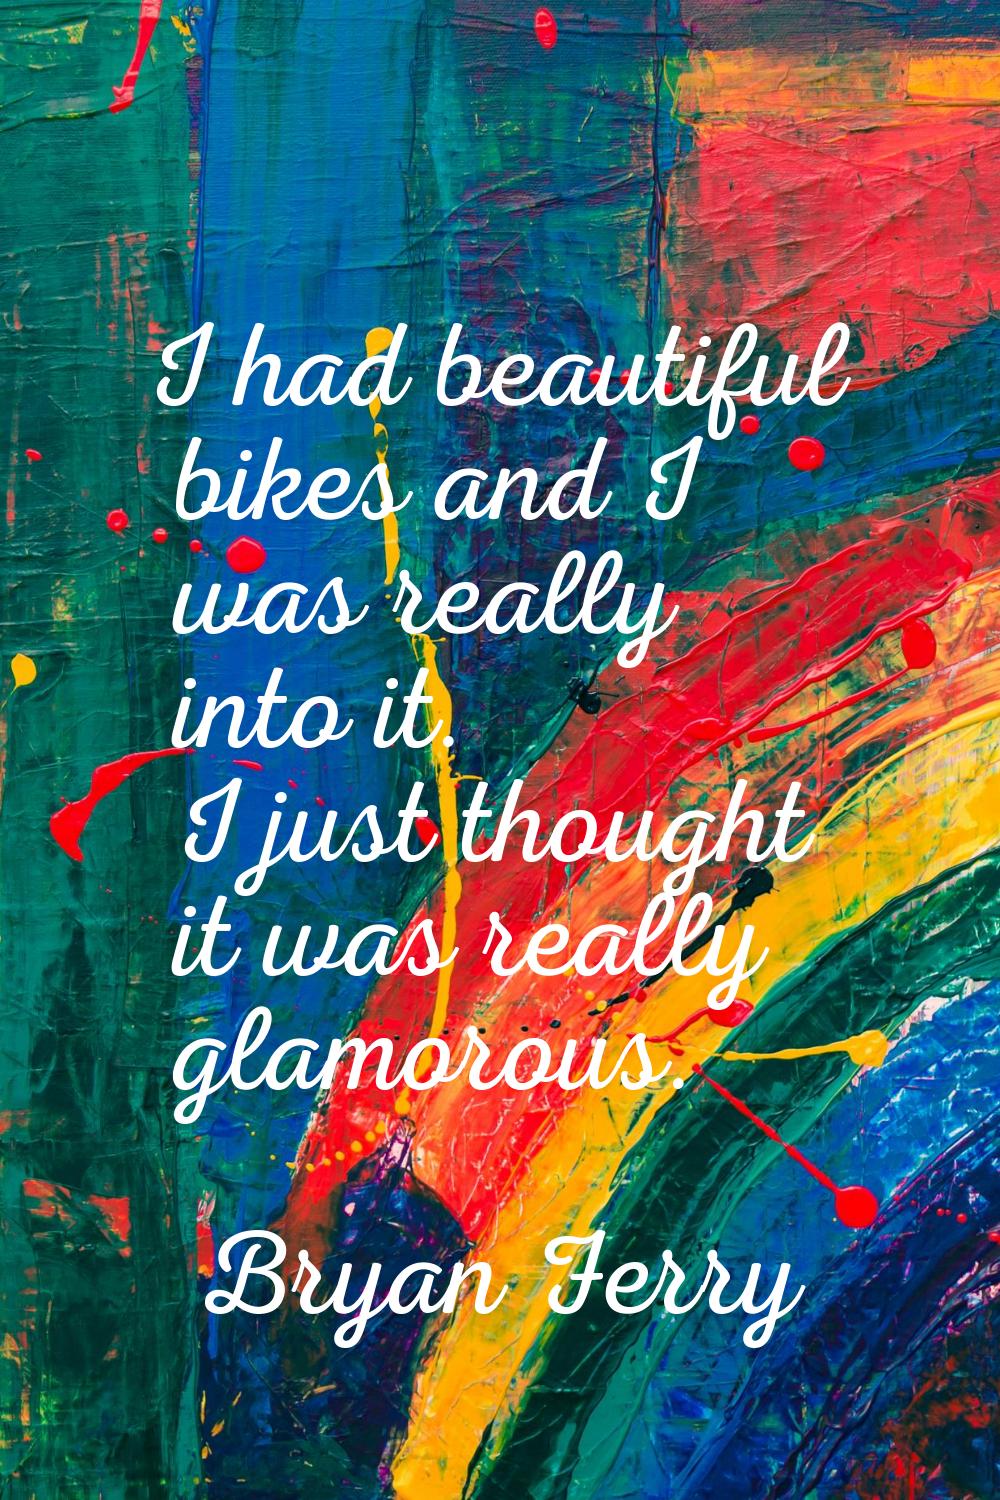 I had beautiful bikes and I was really into it. I just thought it was really glamorous.